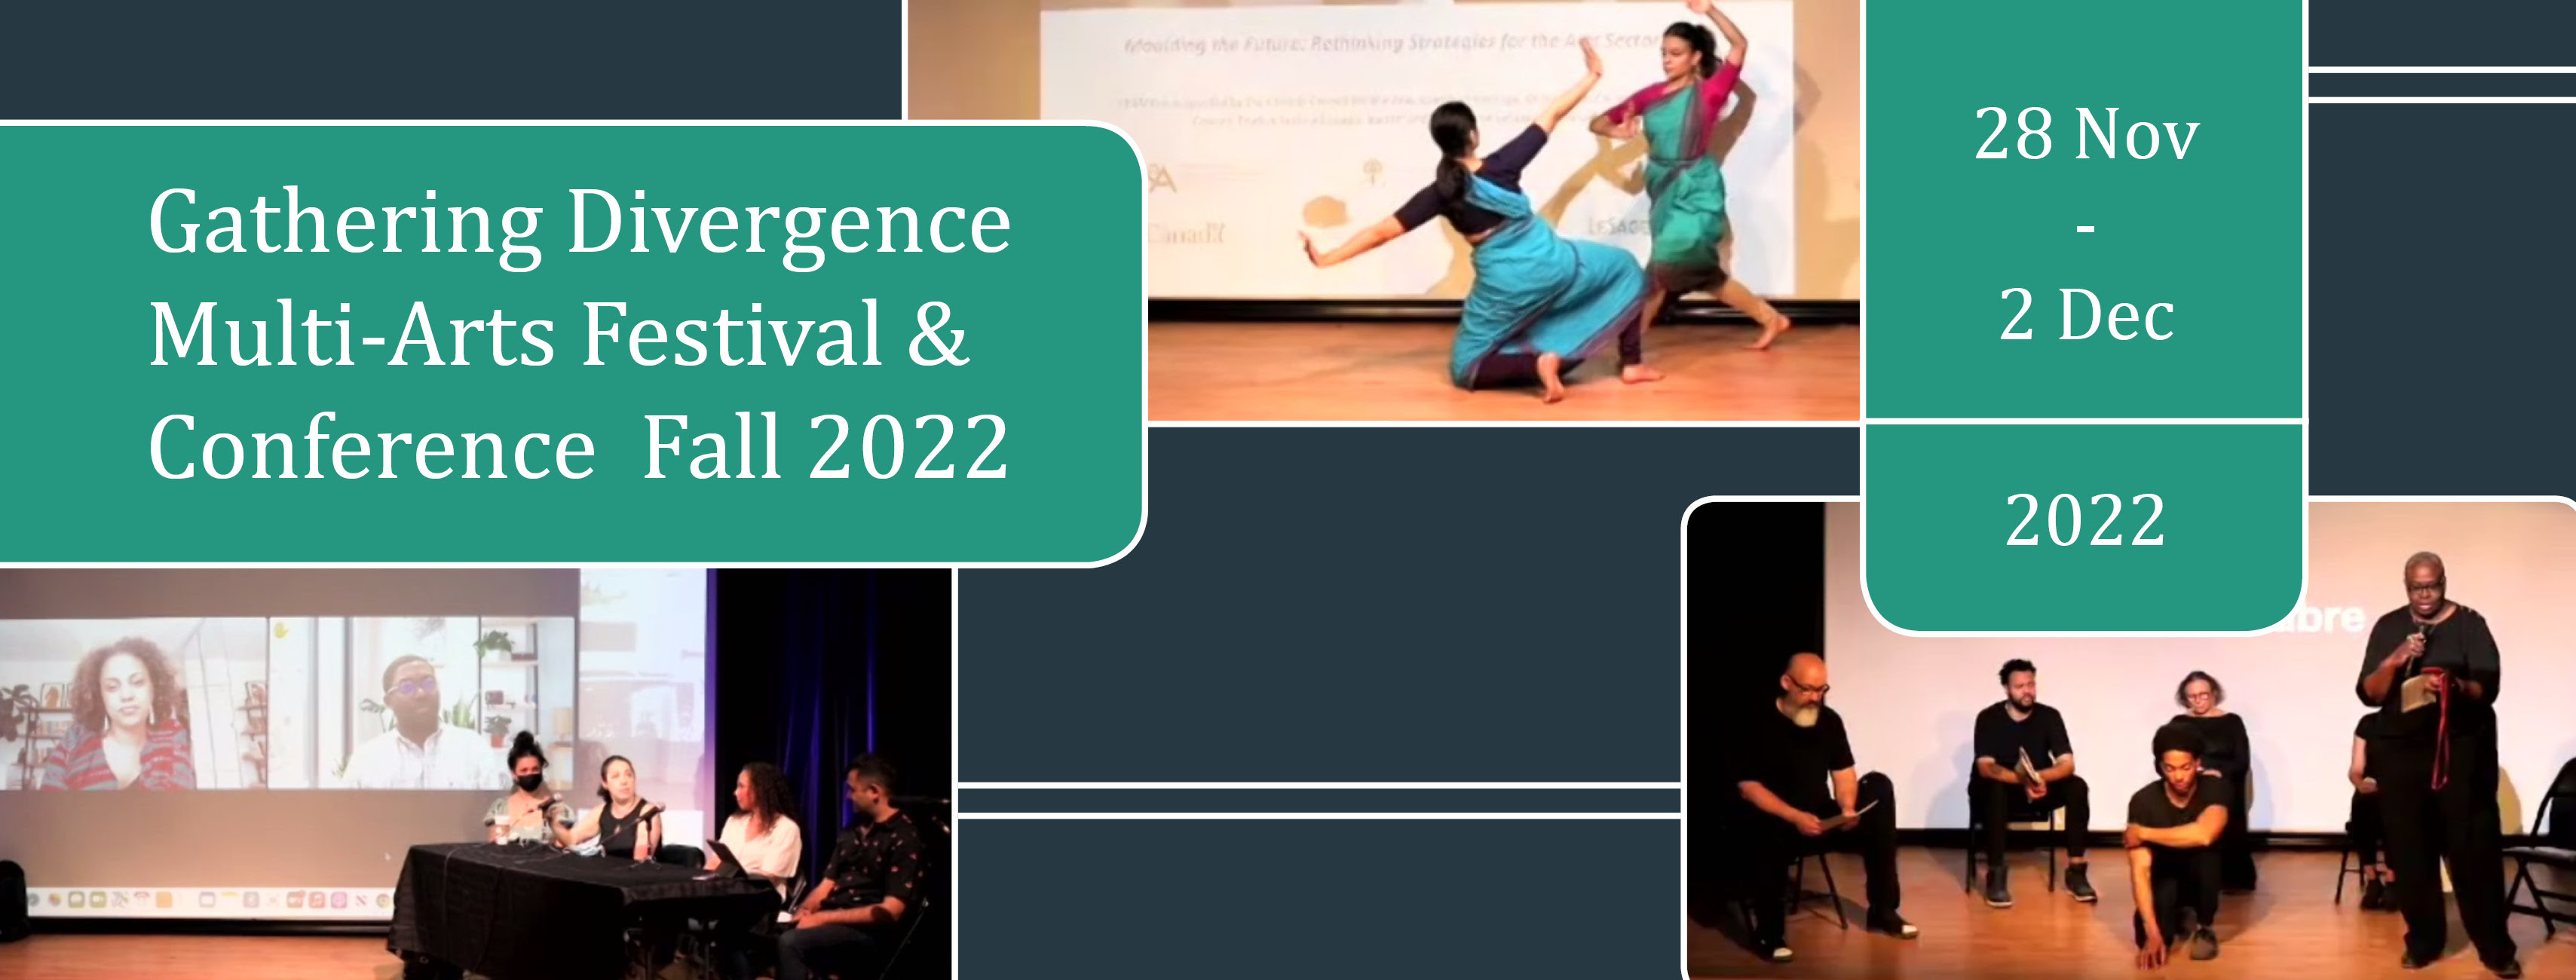 Text: Gathering Divergence Multi-Arts Festival & Conference  Fall 2022. 28 Nov to 2 Dec, 2022. Images: tha banner has 3 images including a panel, 2 dancers performing, and theater reading with 6 people on the stage.  